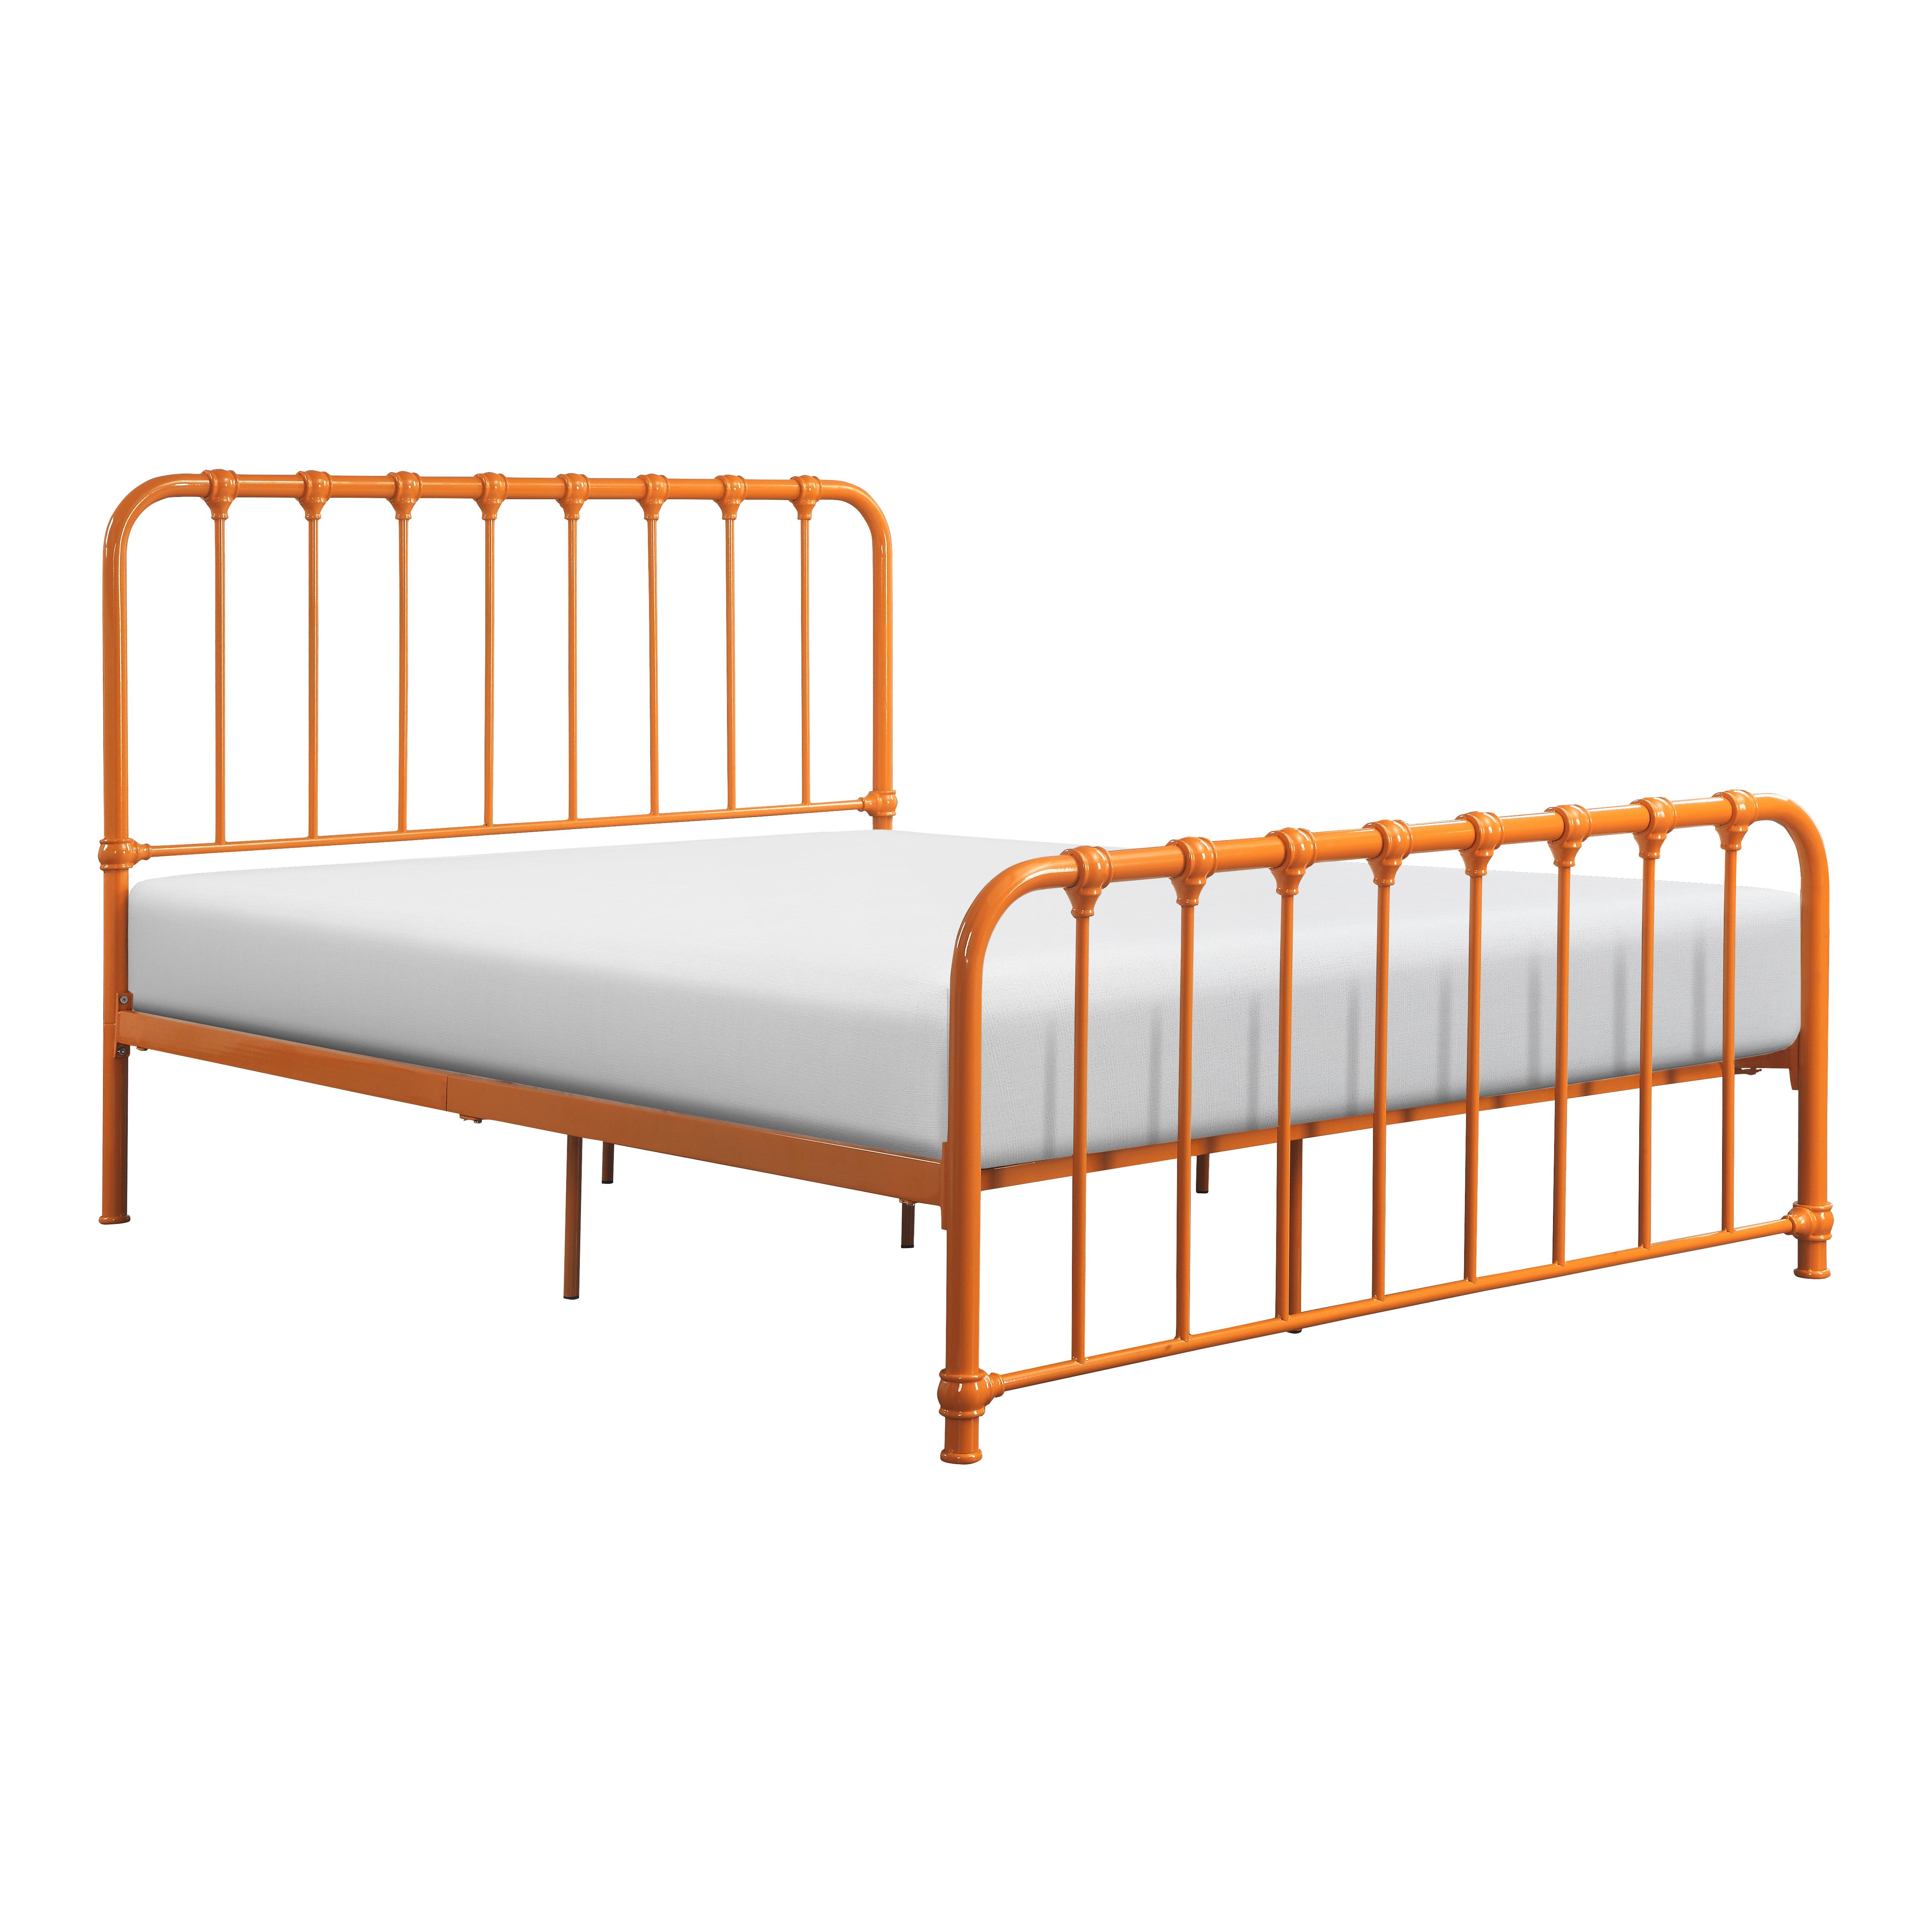 Classic Bed 1571RN-1 Bethany 1571RN-1 in Orange 